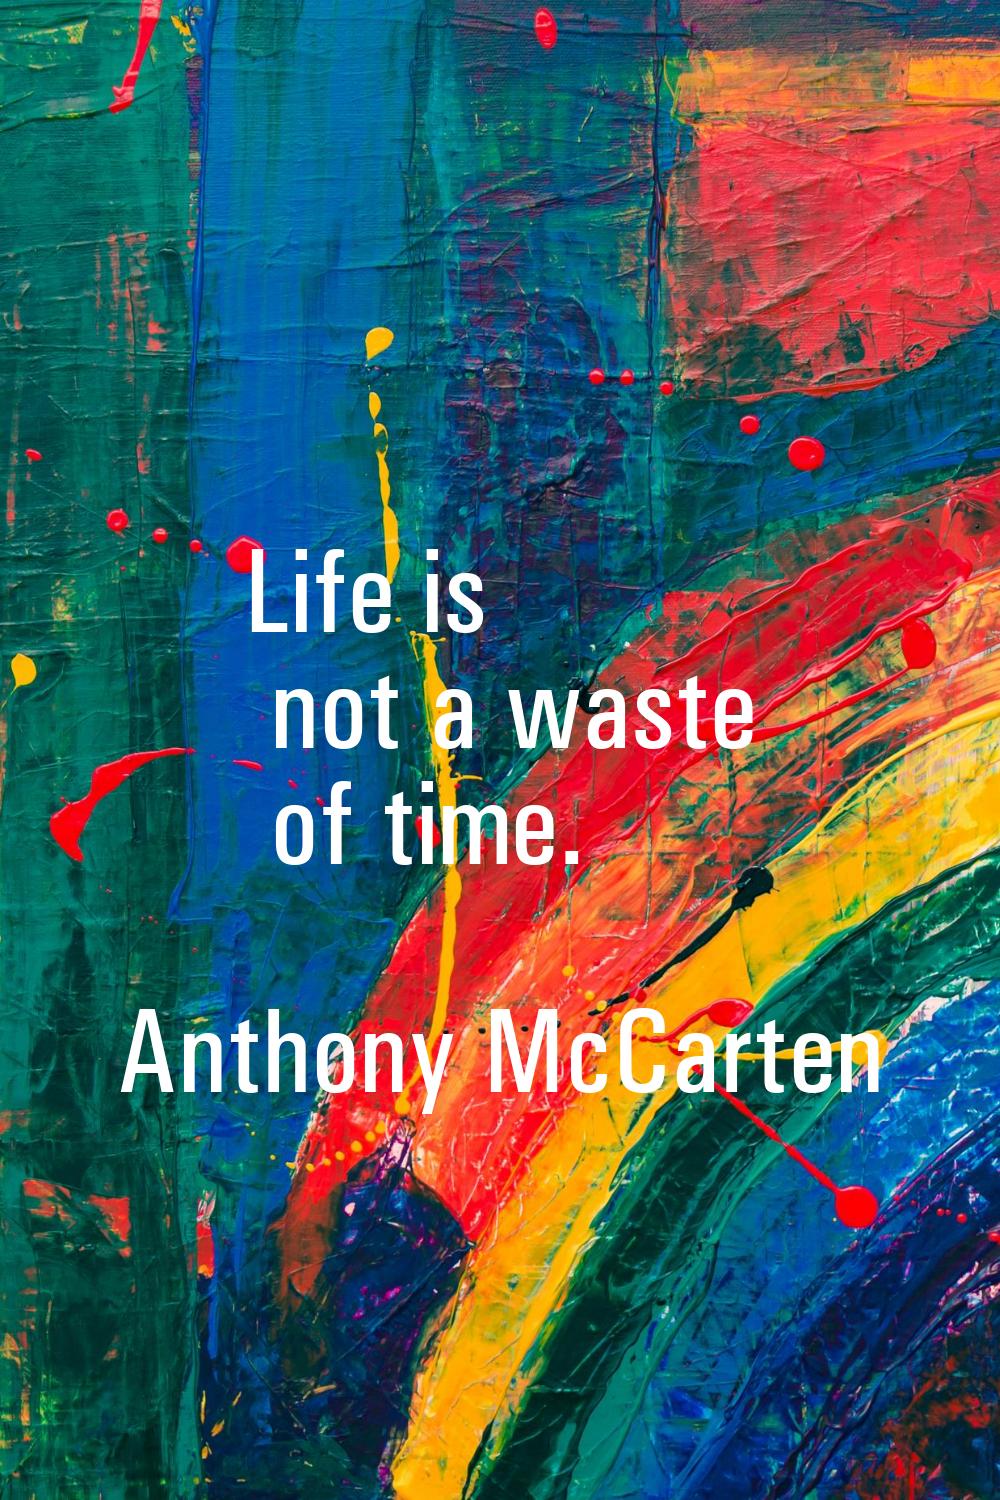 Life is not a waste of time.